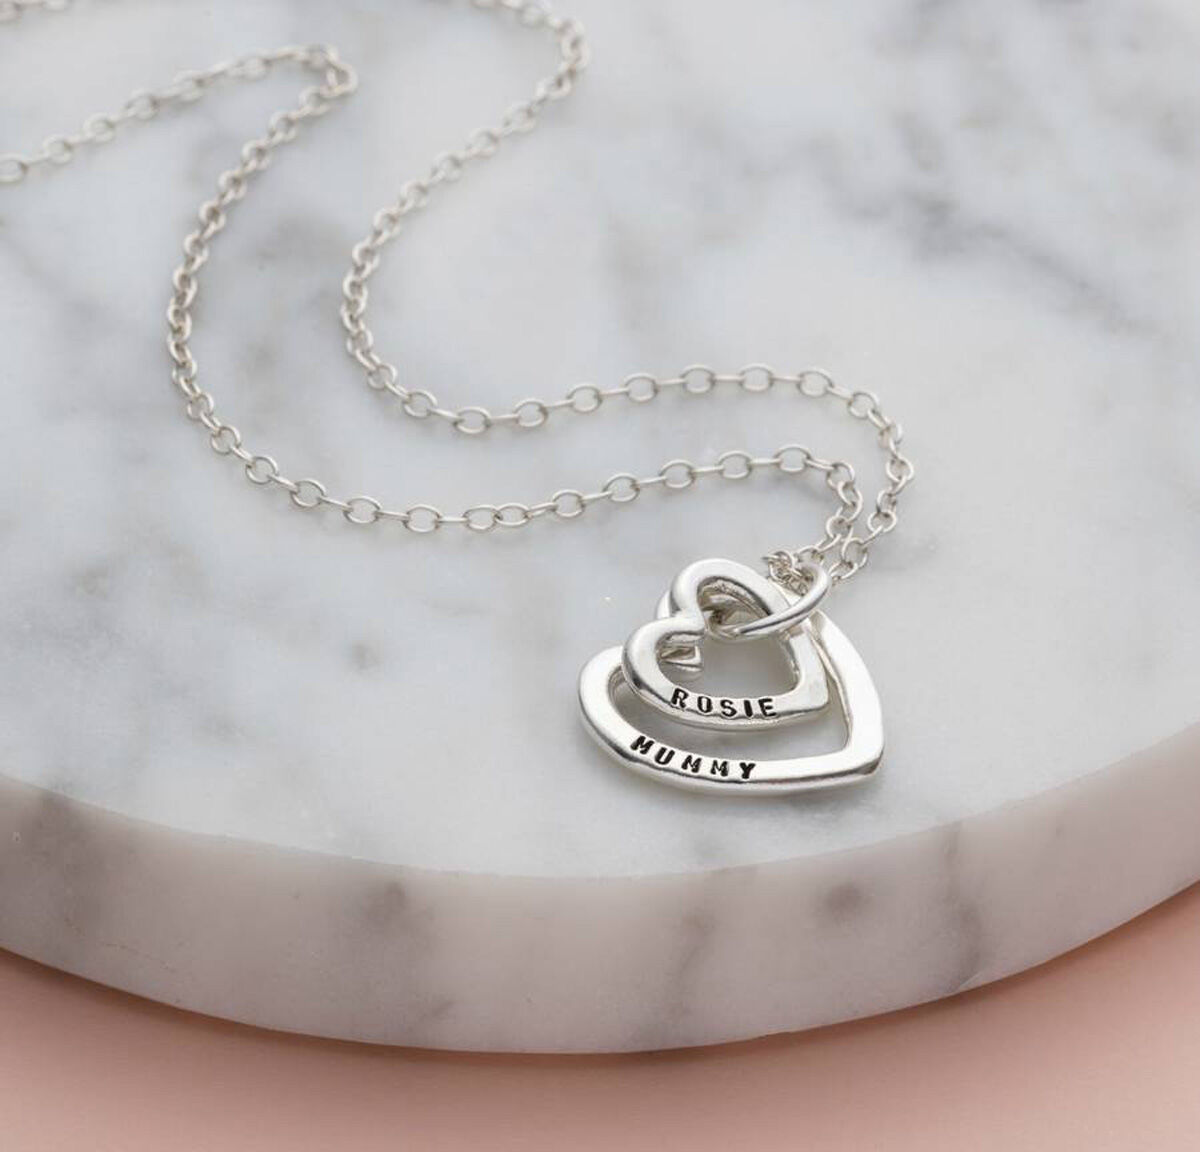 Personalised Baby Portrait Necklace Custom Baby Photo and Name Necklace  Gift for Mom • Made By Mums